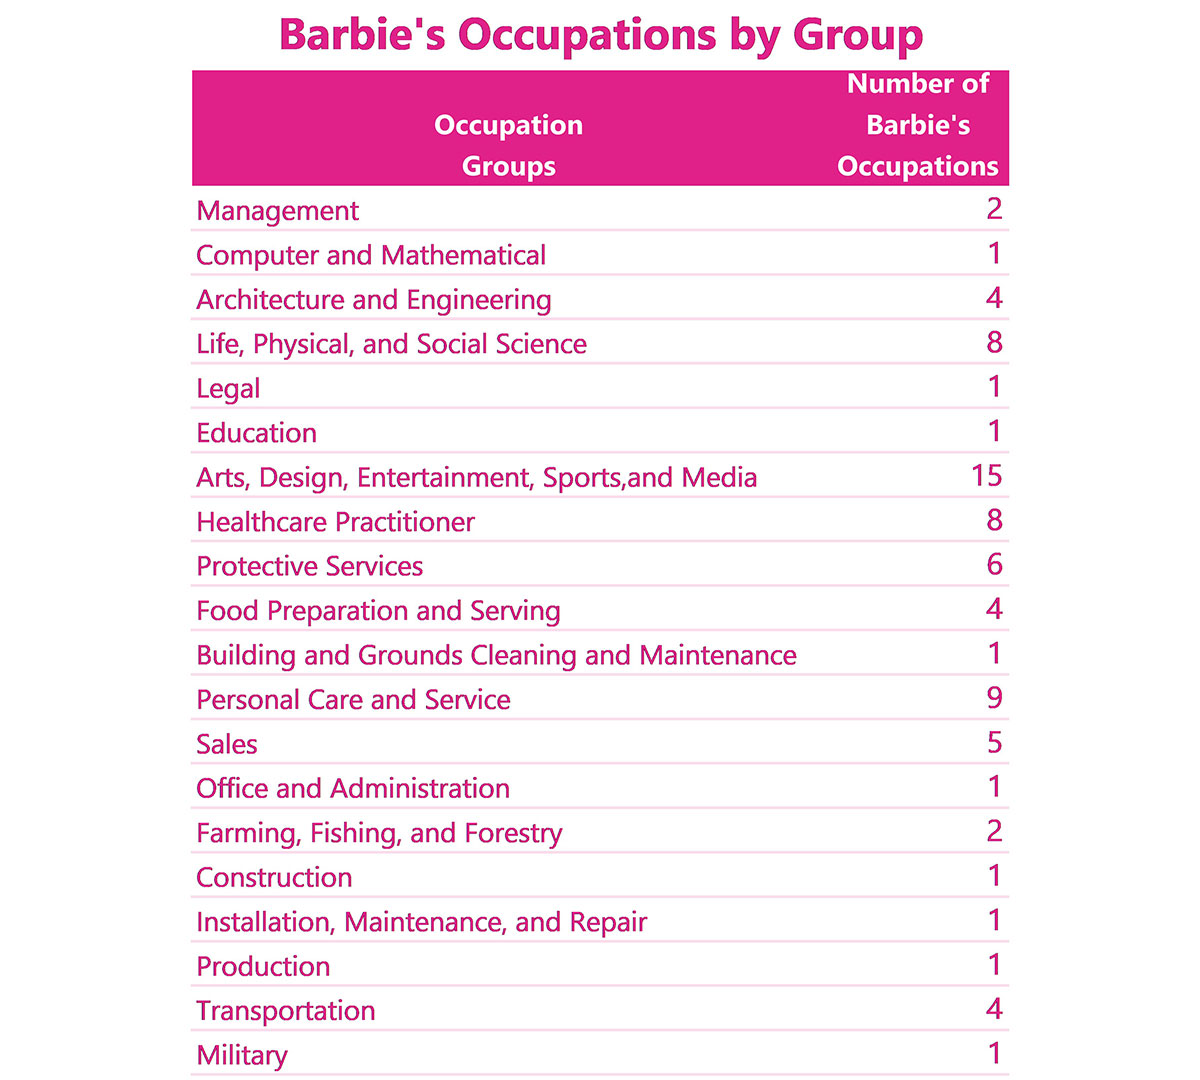 A chart showing Barbie's occupations by group